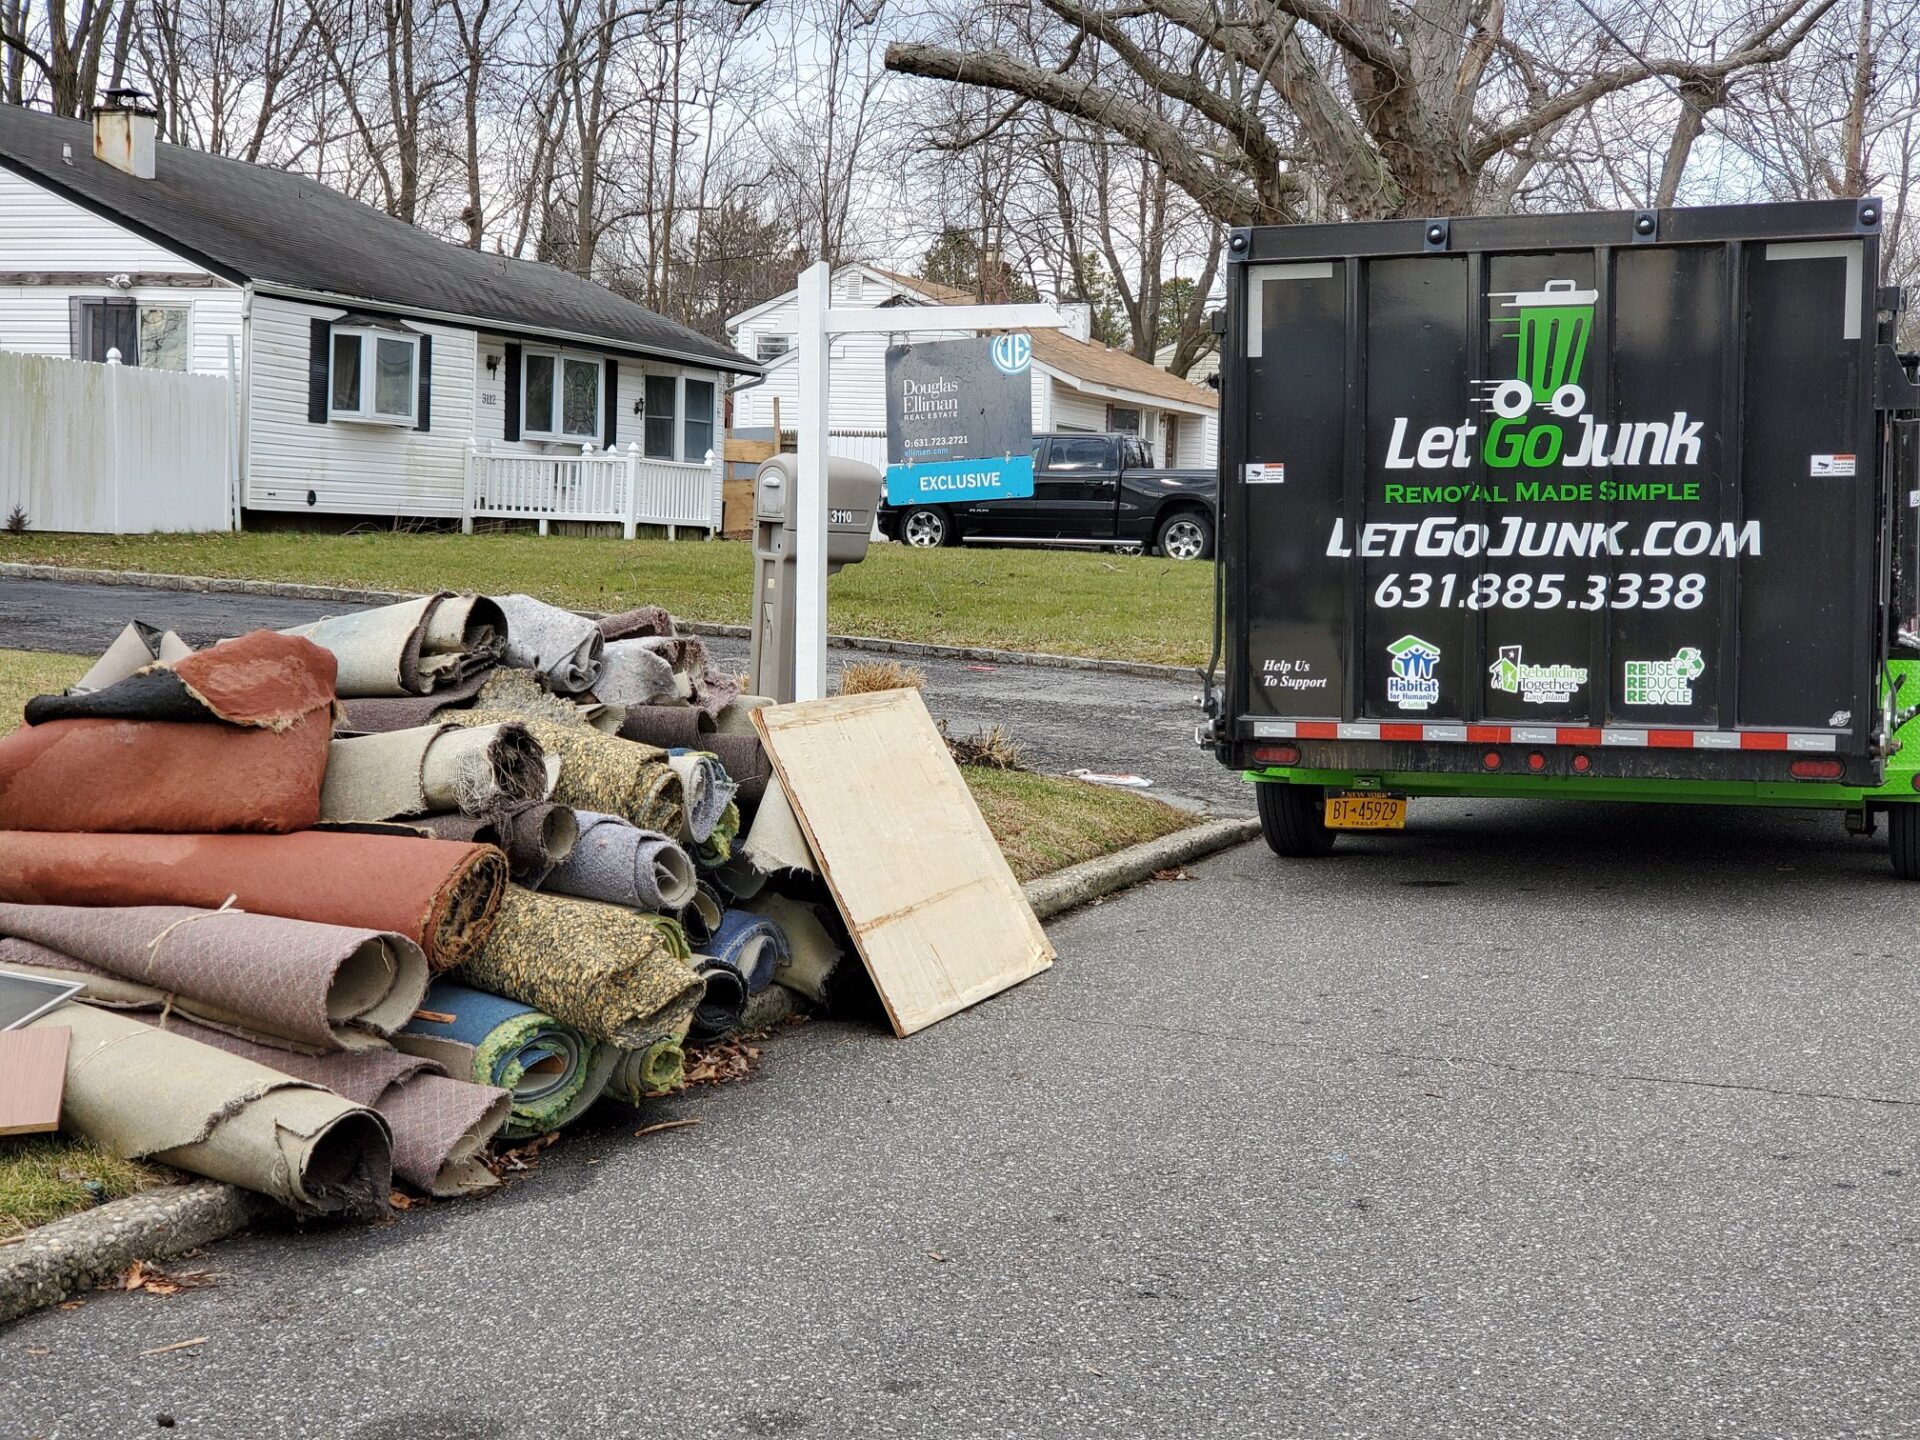 Carpets piled outside ready for Let Go Junk to load it into their dumpster